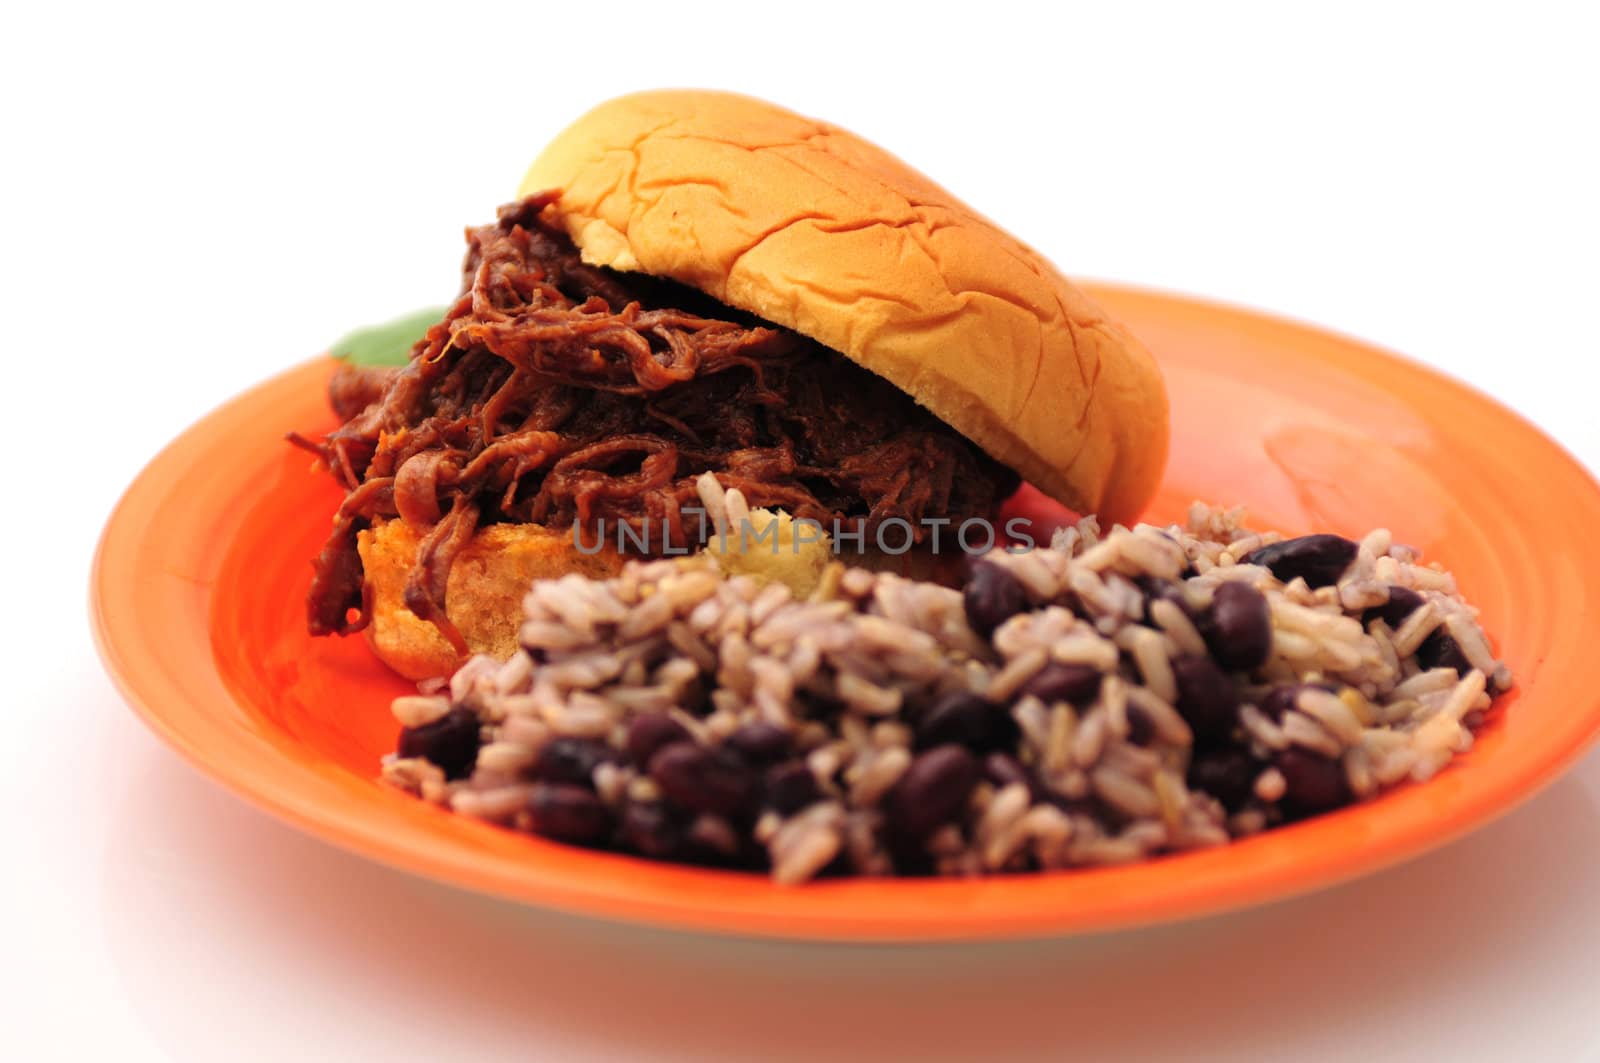 Barbecue beef sandwich dinner by ftlaudgirl